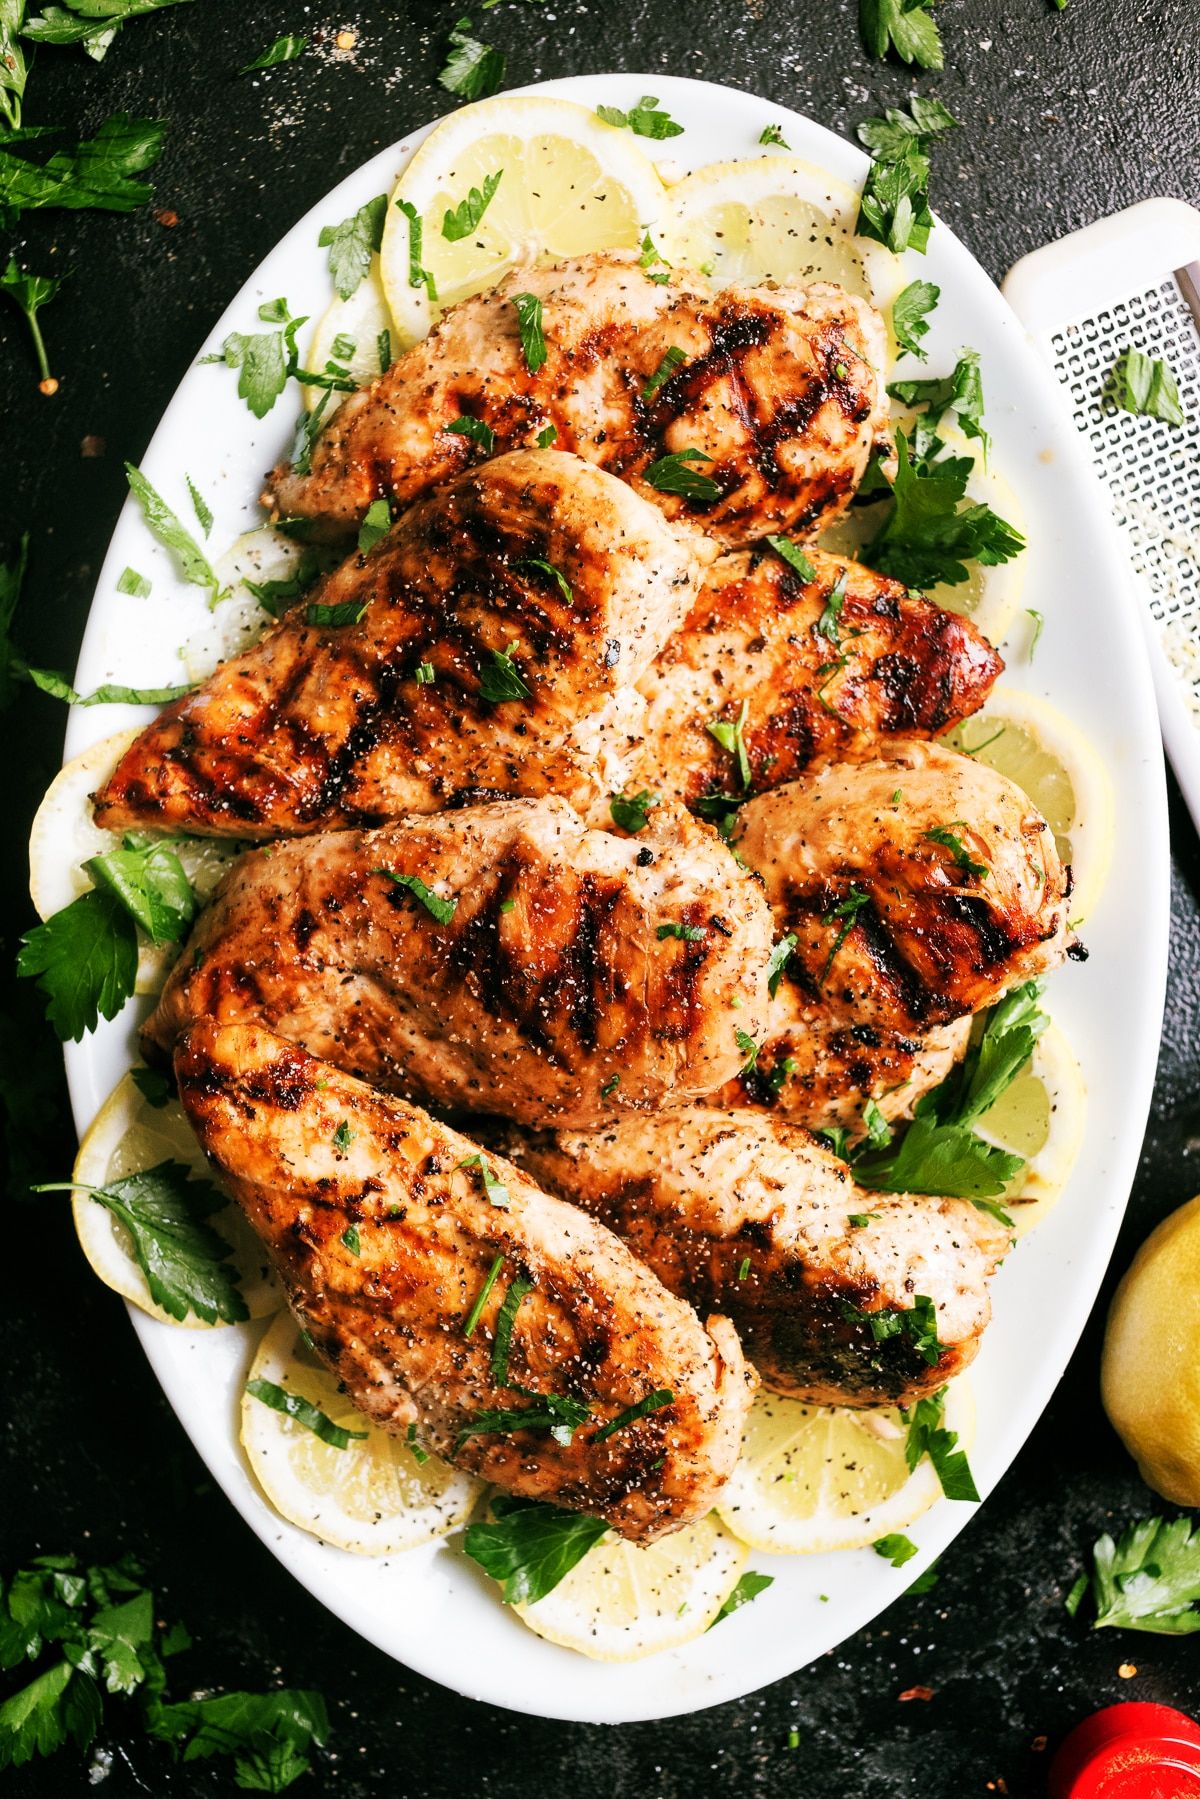 This Lemon Garlic Marinated Grilled chicken breast is flavorful, juicy, and the perfect meal perfect for any backyard barbecue!